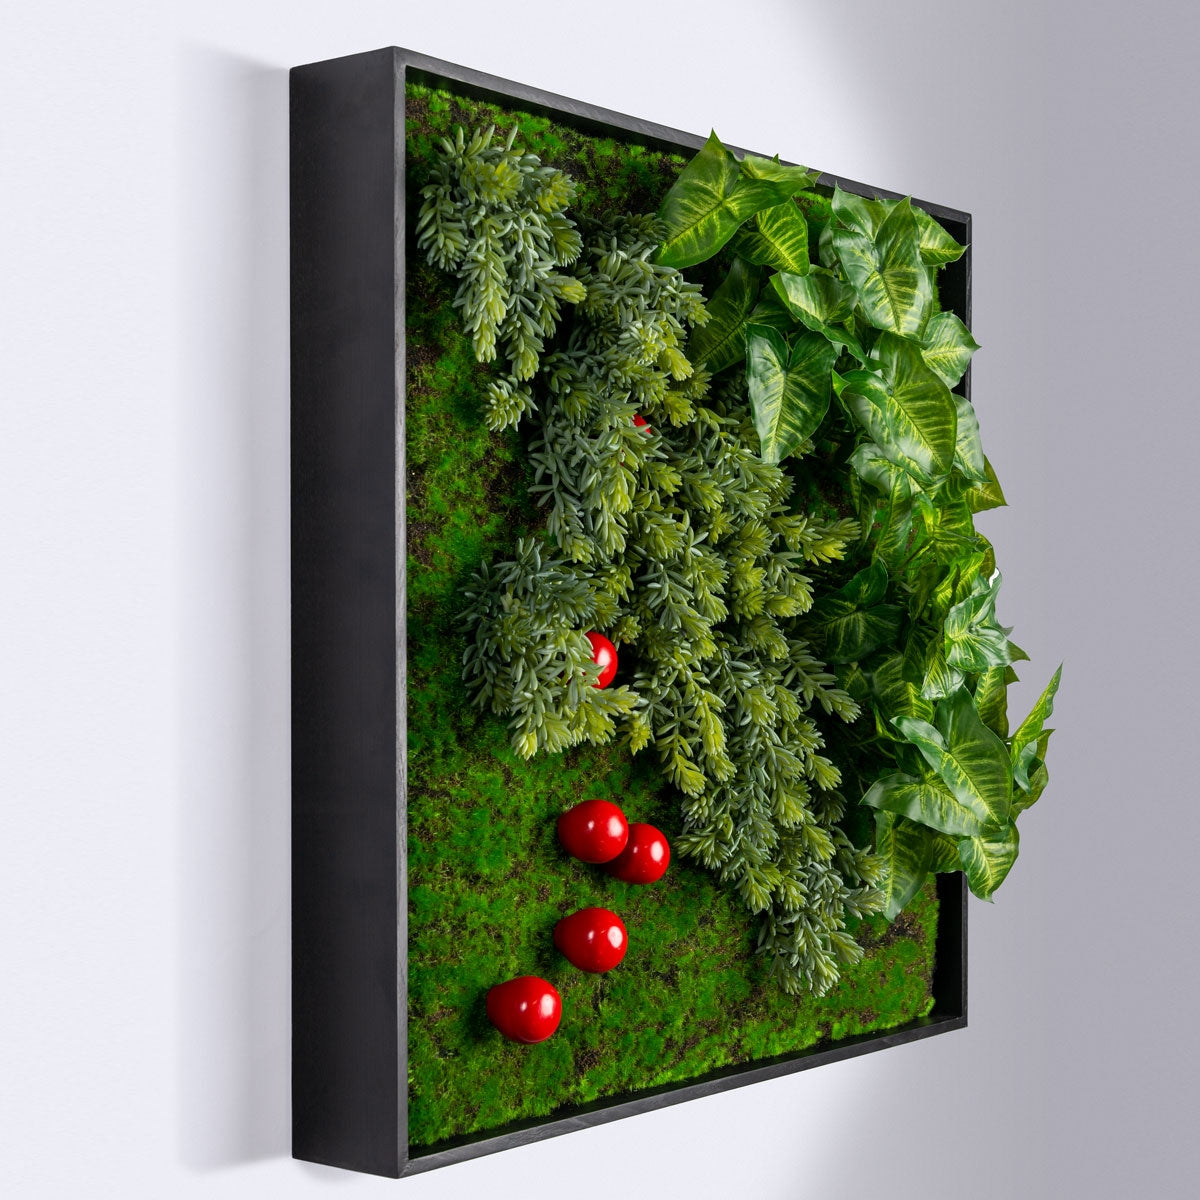 Green Wall, Mix w/ Fig Wall Play™